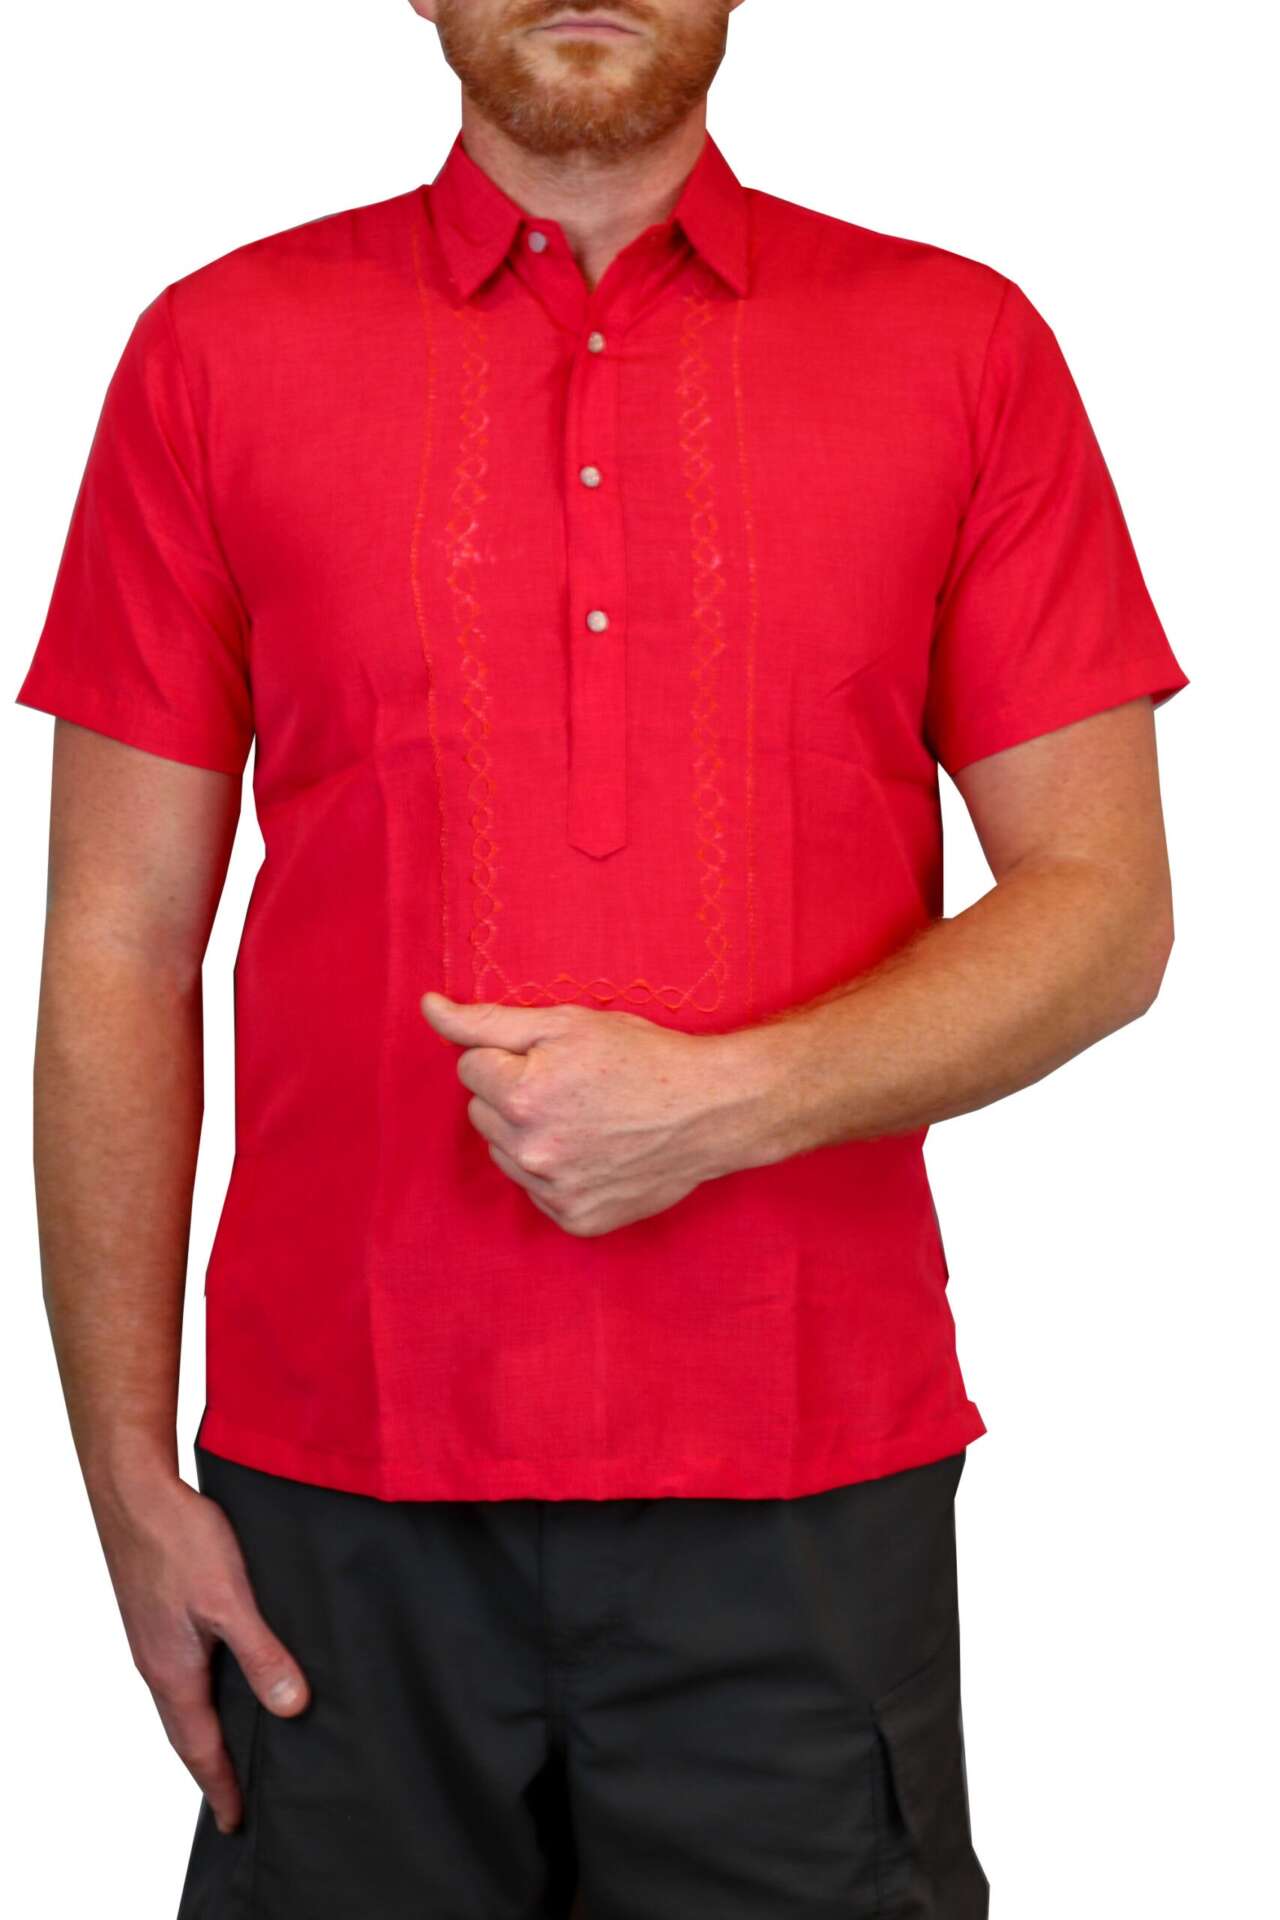 polo-red-2